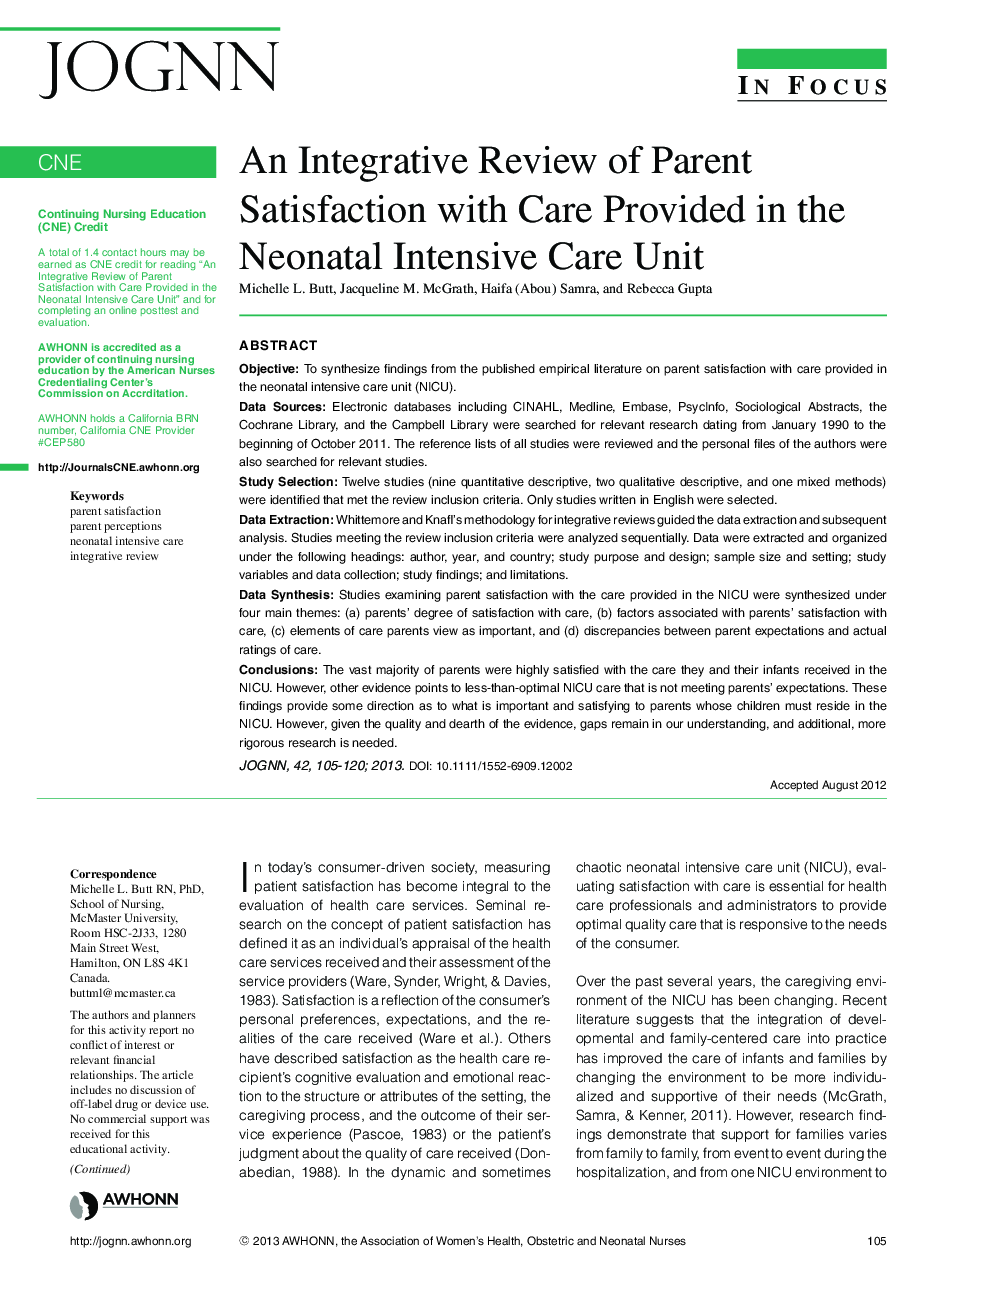 An Integrative Review of Parent Satisfaction with Care Provided in the Neonatal Intensive Care Unit